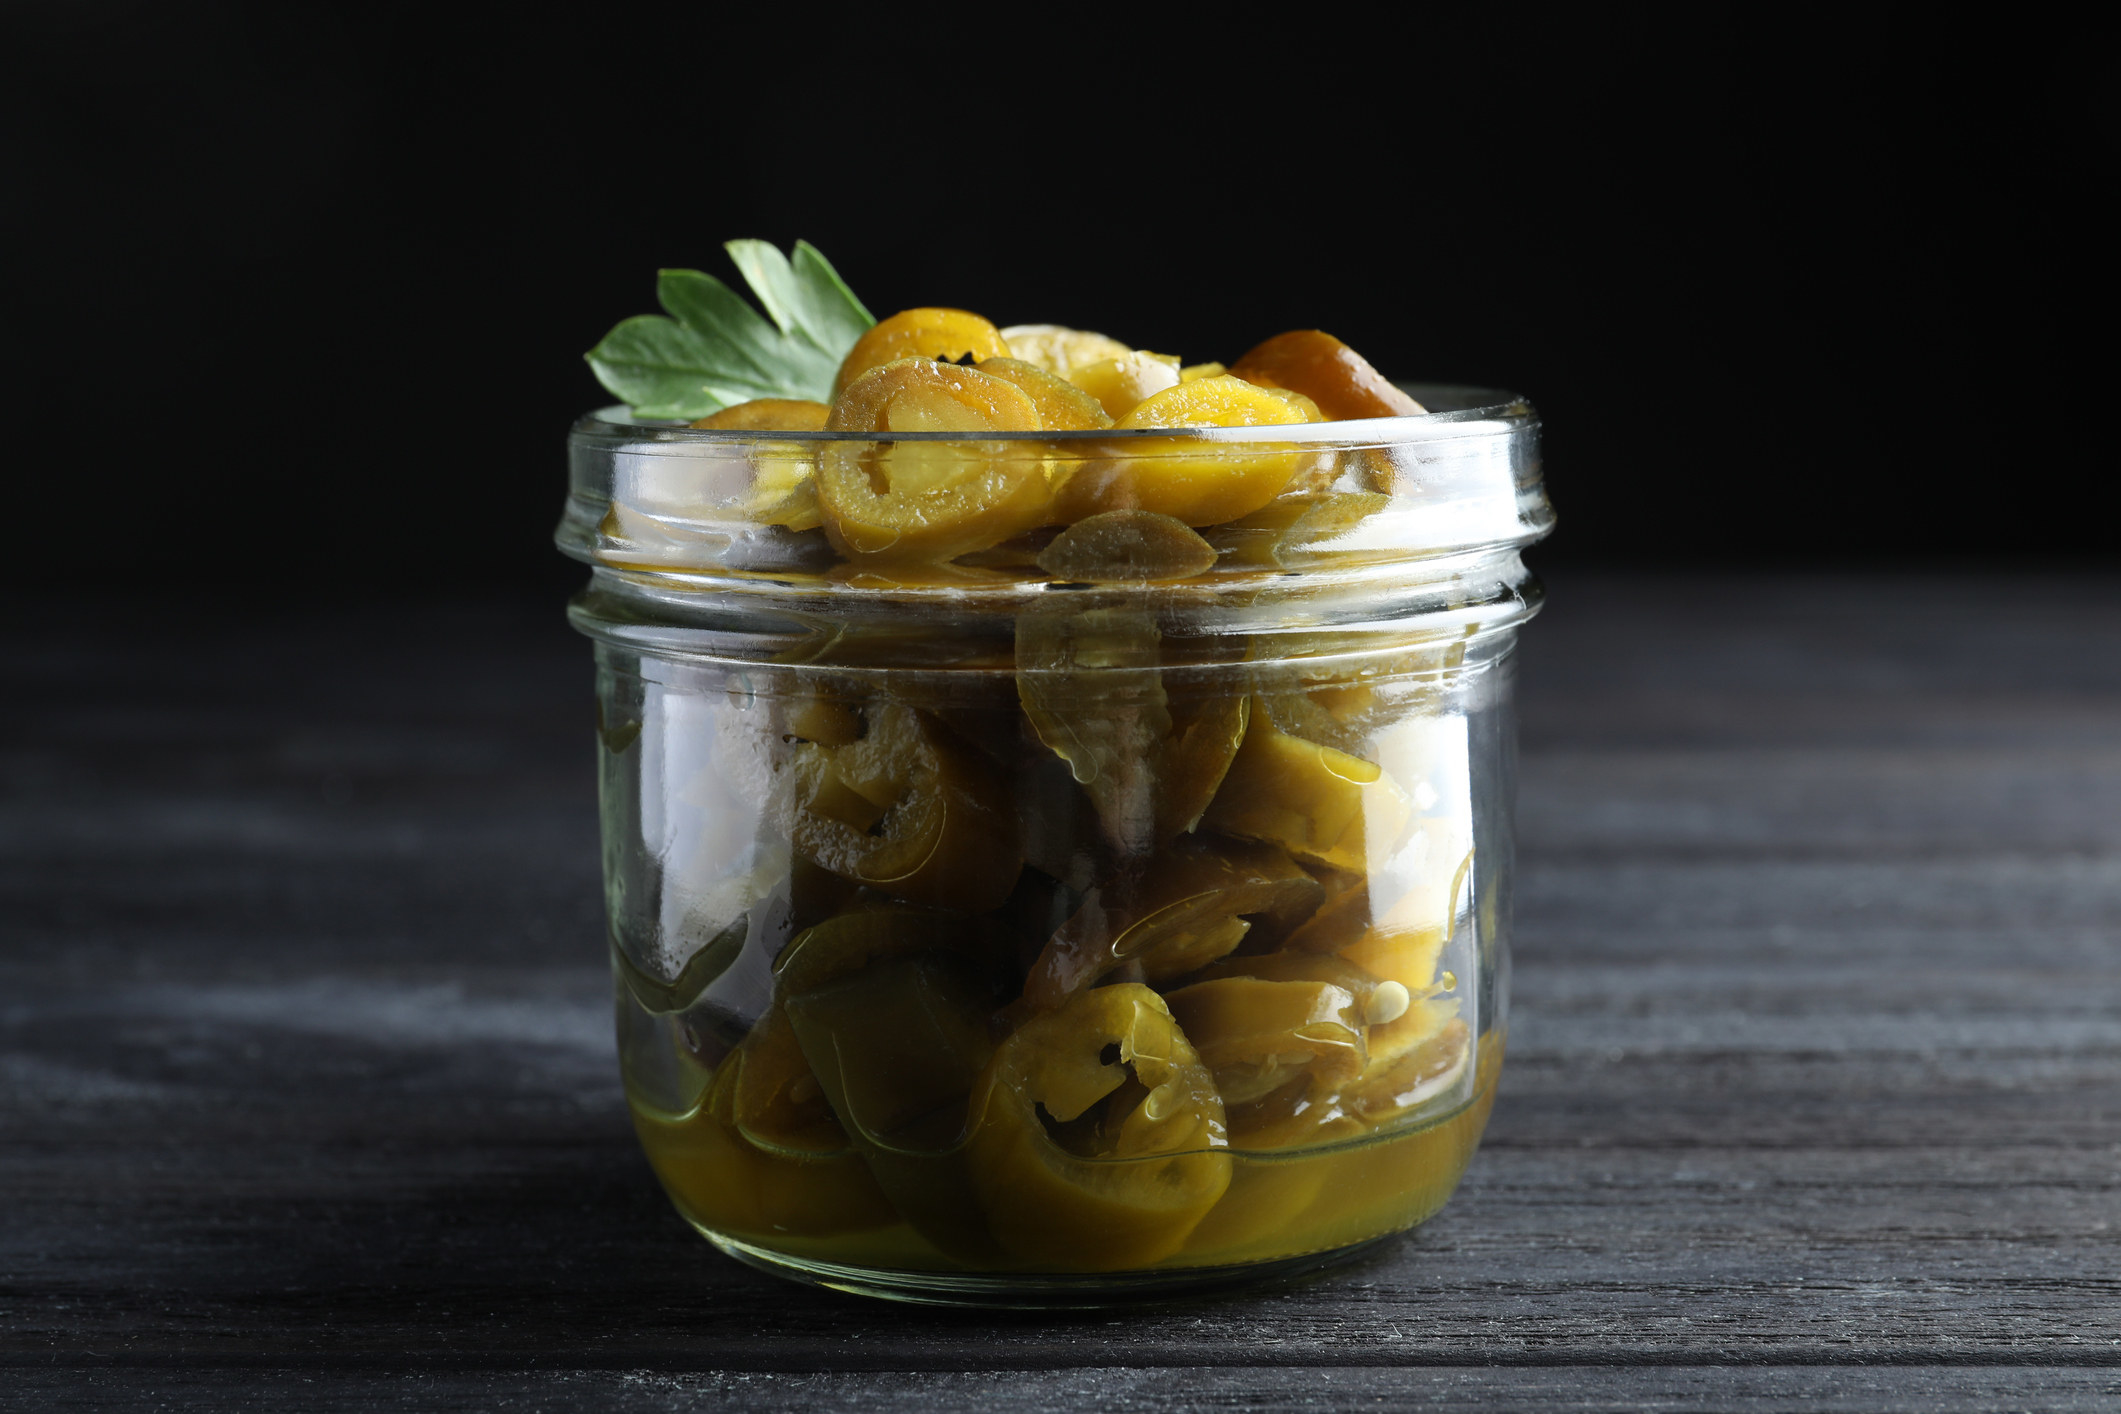 Glass jar with slices of pickled green jalapeño peppers.